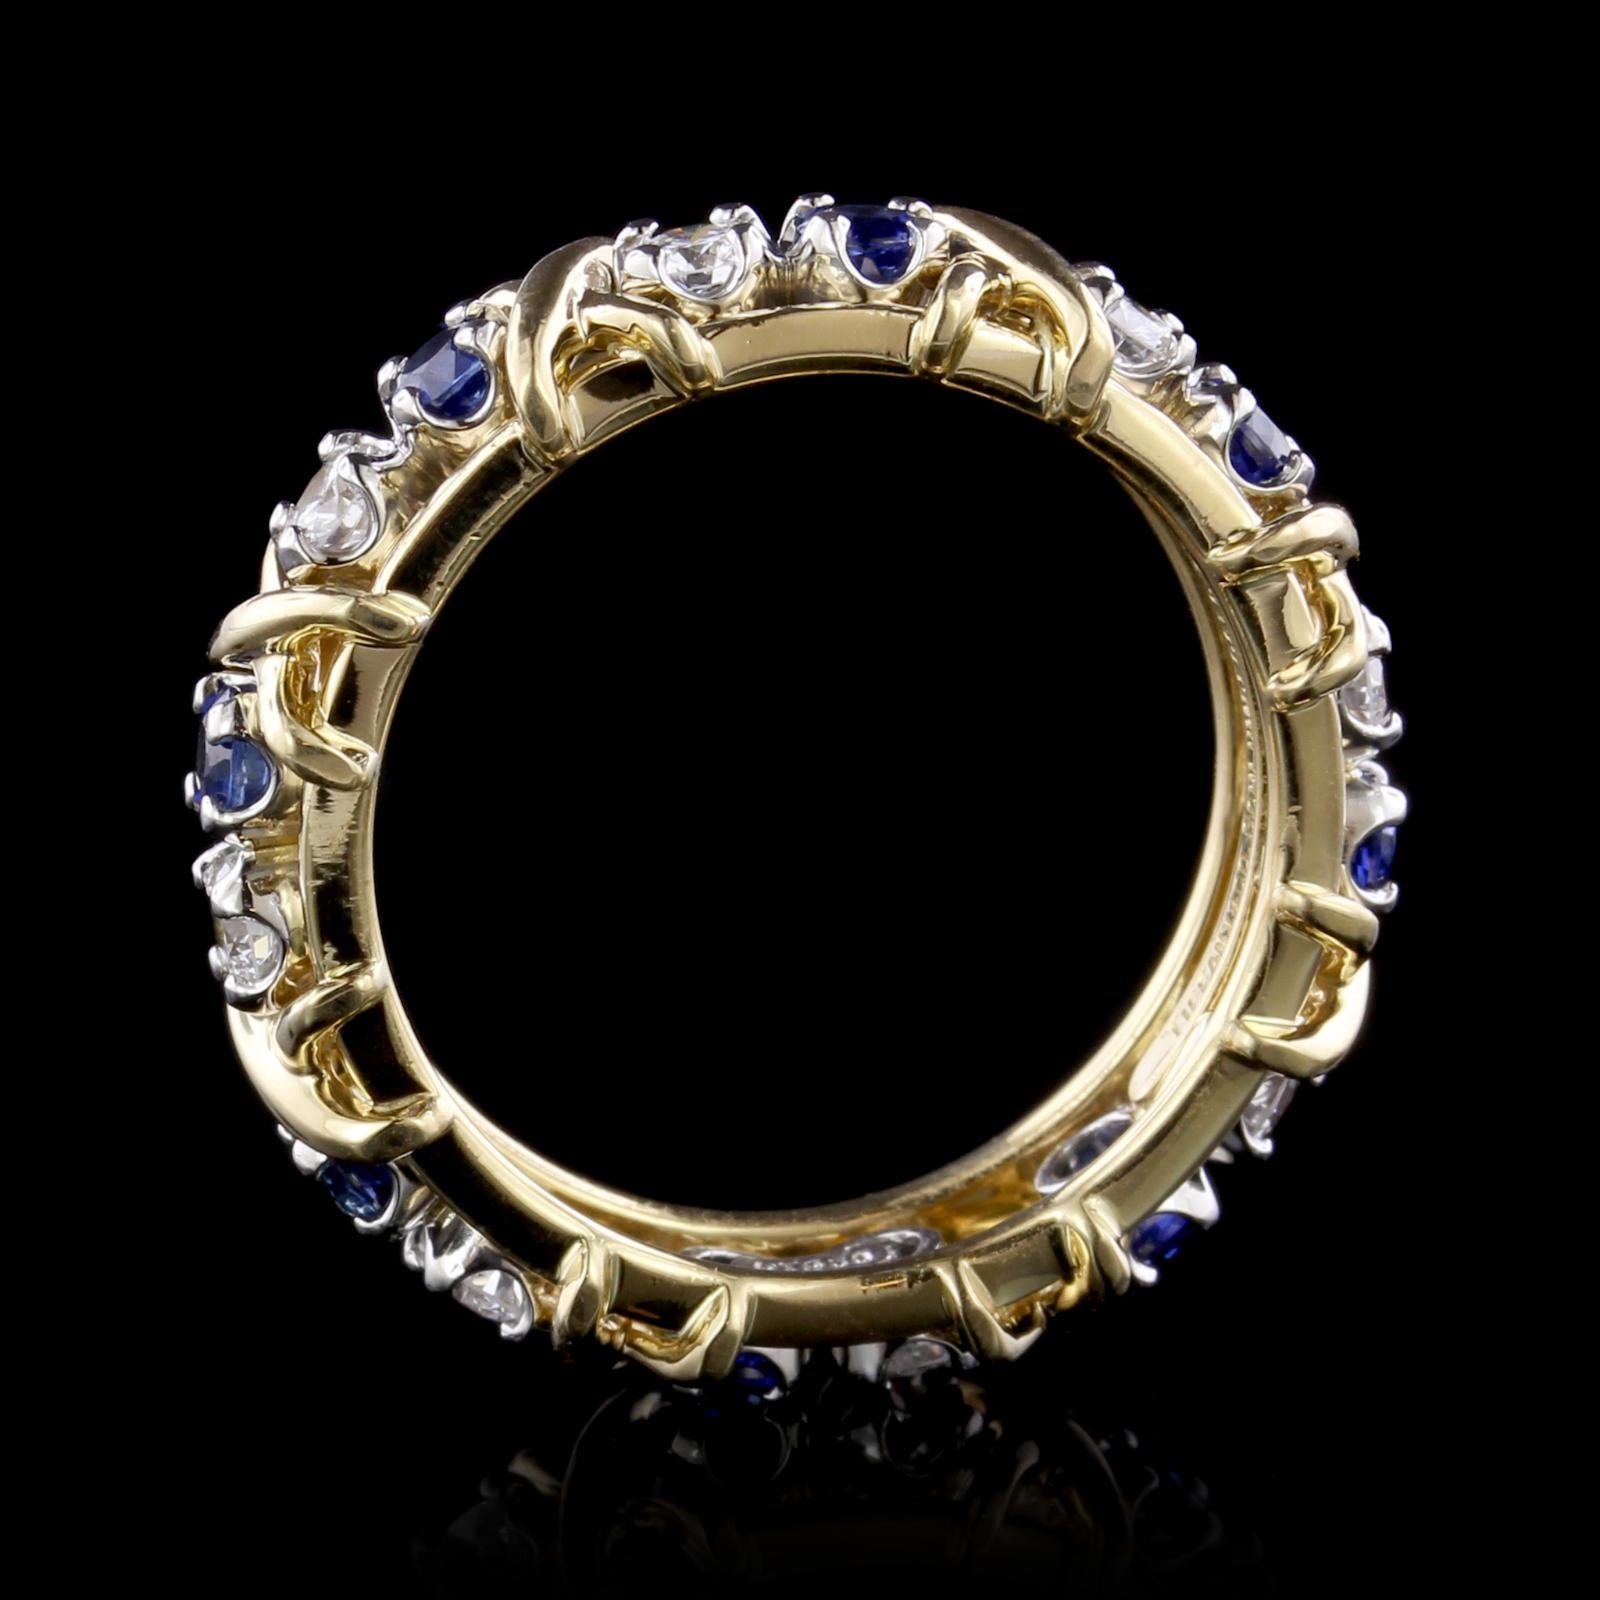 Tiffany & Co. Schlumbereger 18K Yellow Gold and Platinum Sixteen Stone Sapphire and Diamond Ring. The ring is set with eight round cut sapphires weighing .80cttw., and eight full cut diamonds weighing .59cts., FG color, VS carity, size 8.